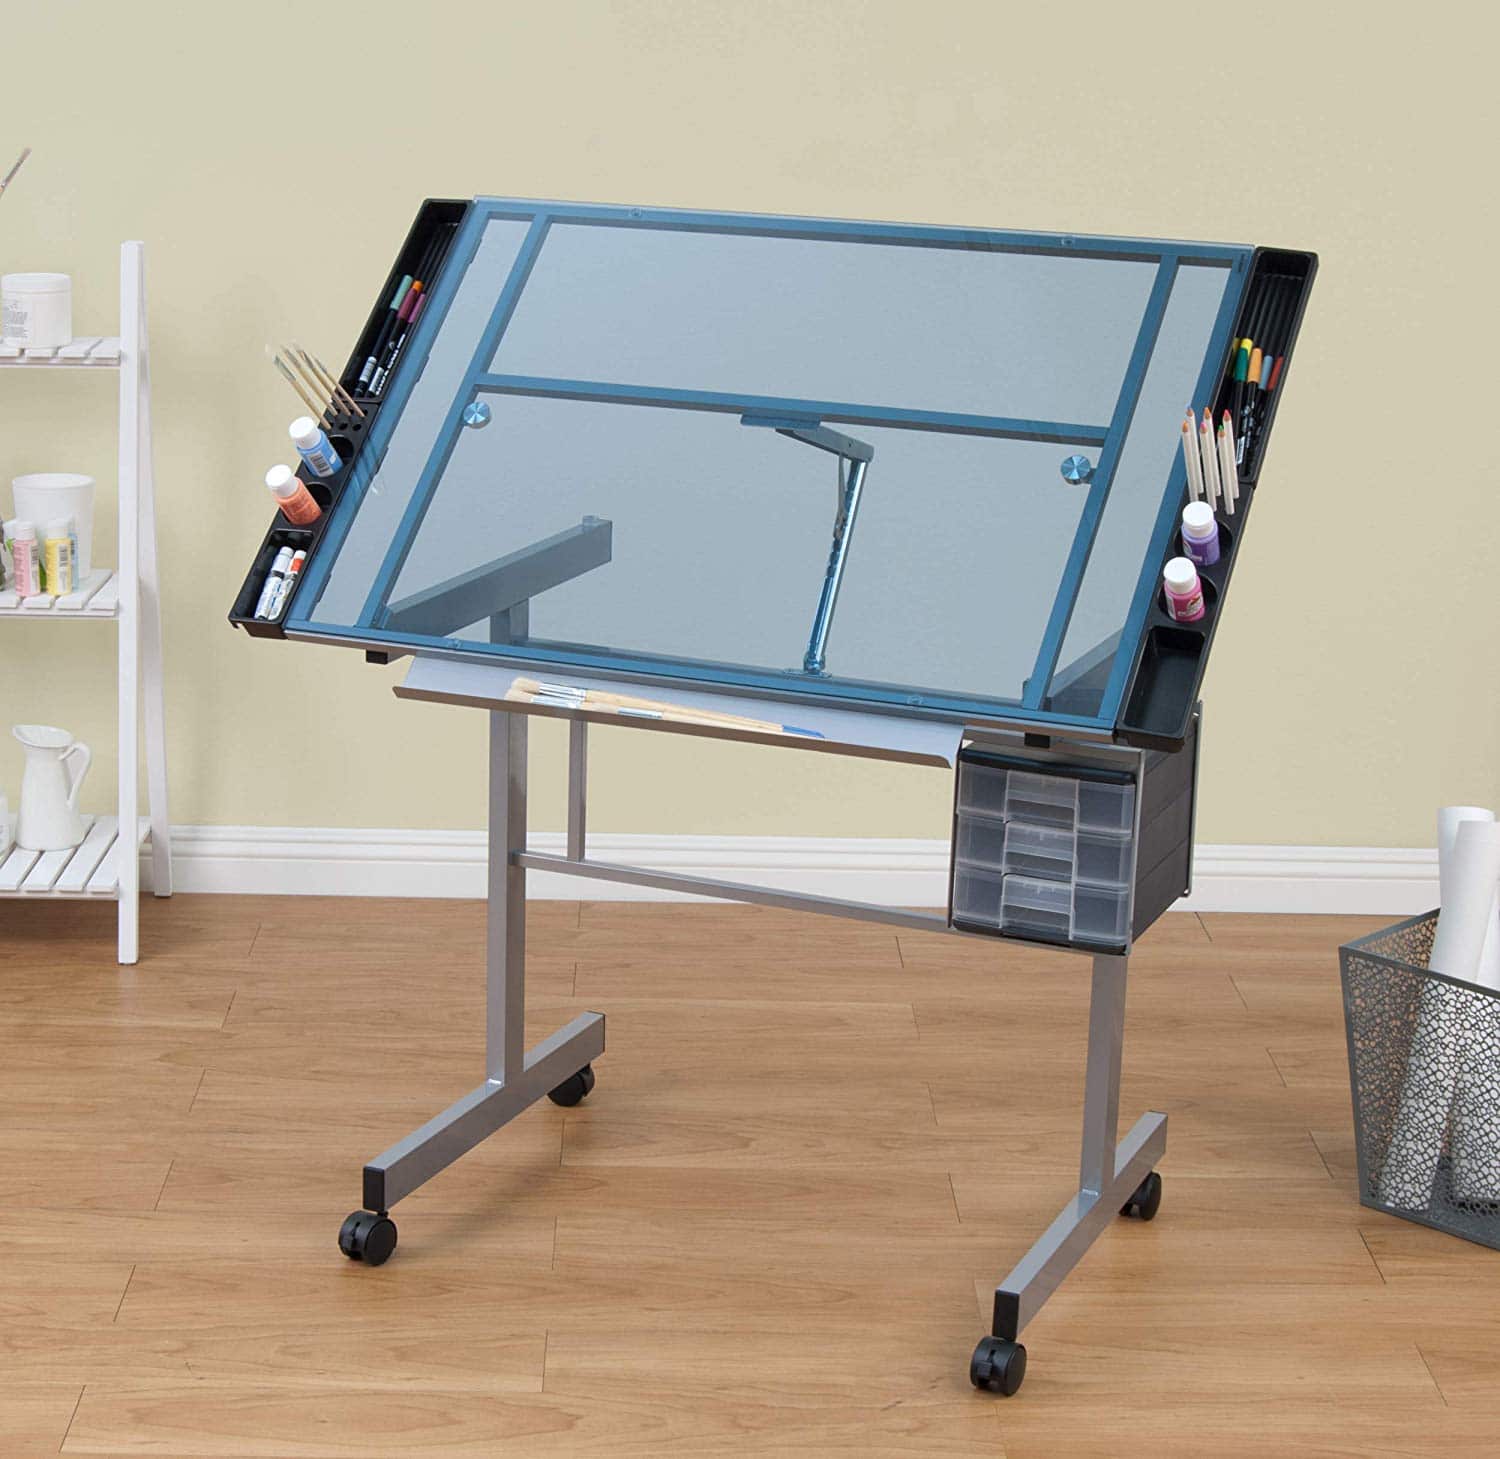 Top 10 Best Drafting Tables for Architects in 2021 Reviews Buyer's Guide